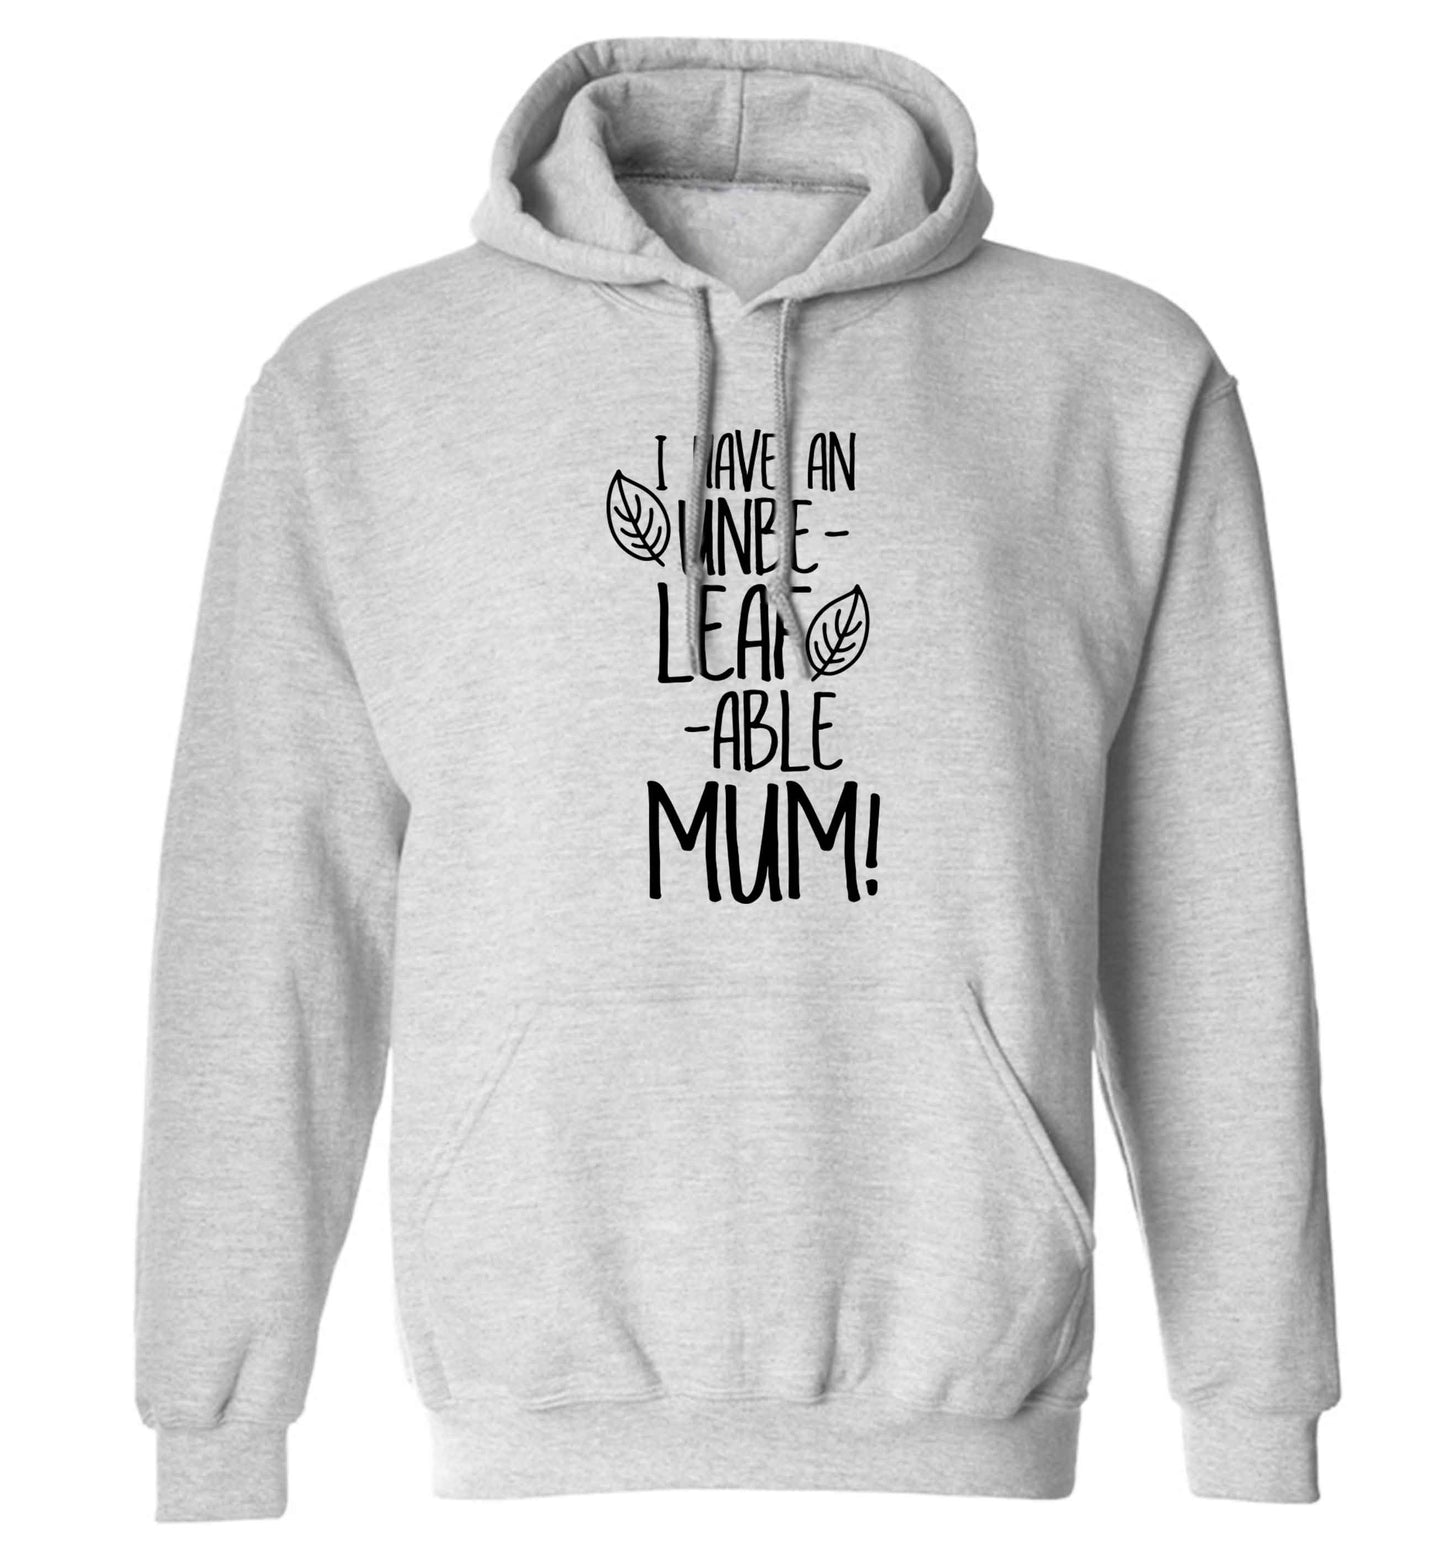 I have an unbeleafable mum! adults unisex grey hoodie 2XL